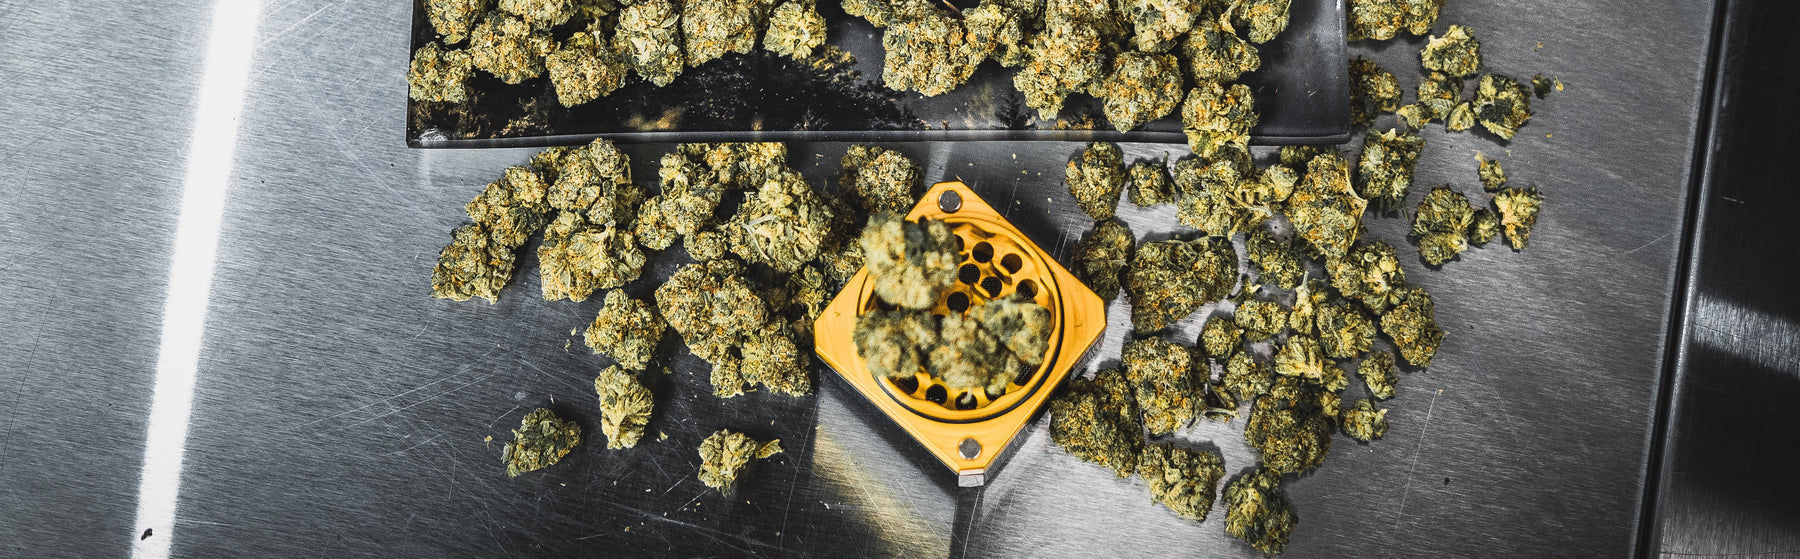 A complete guide to the different kind of weed grinders